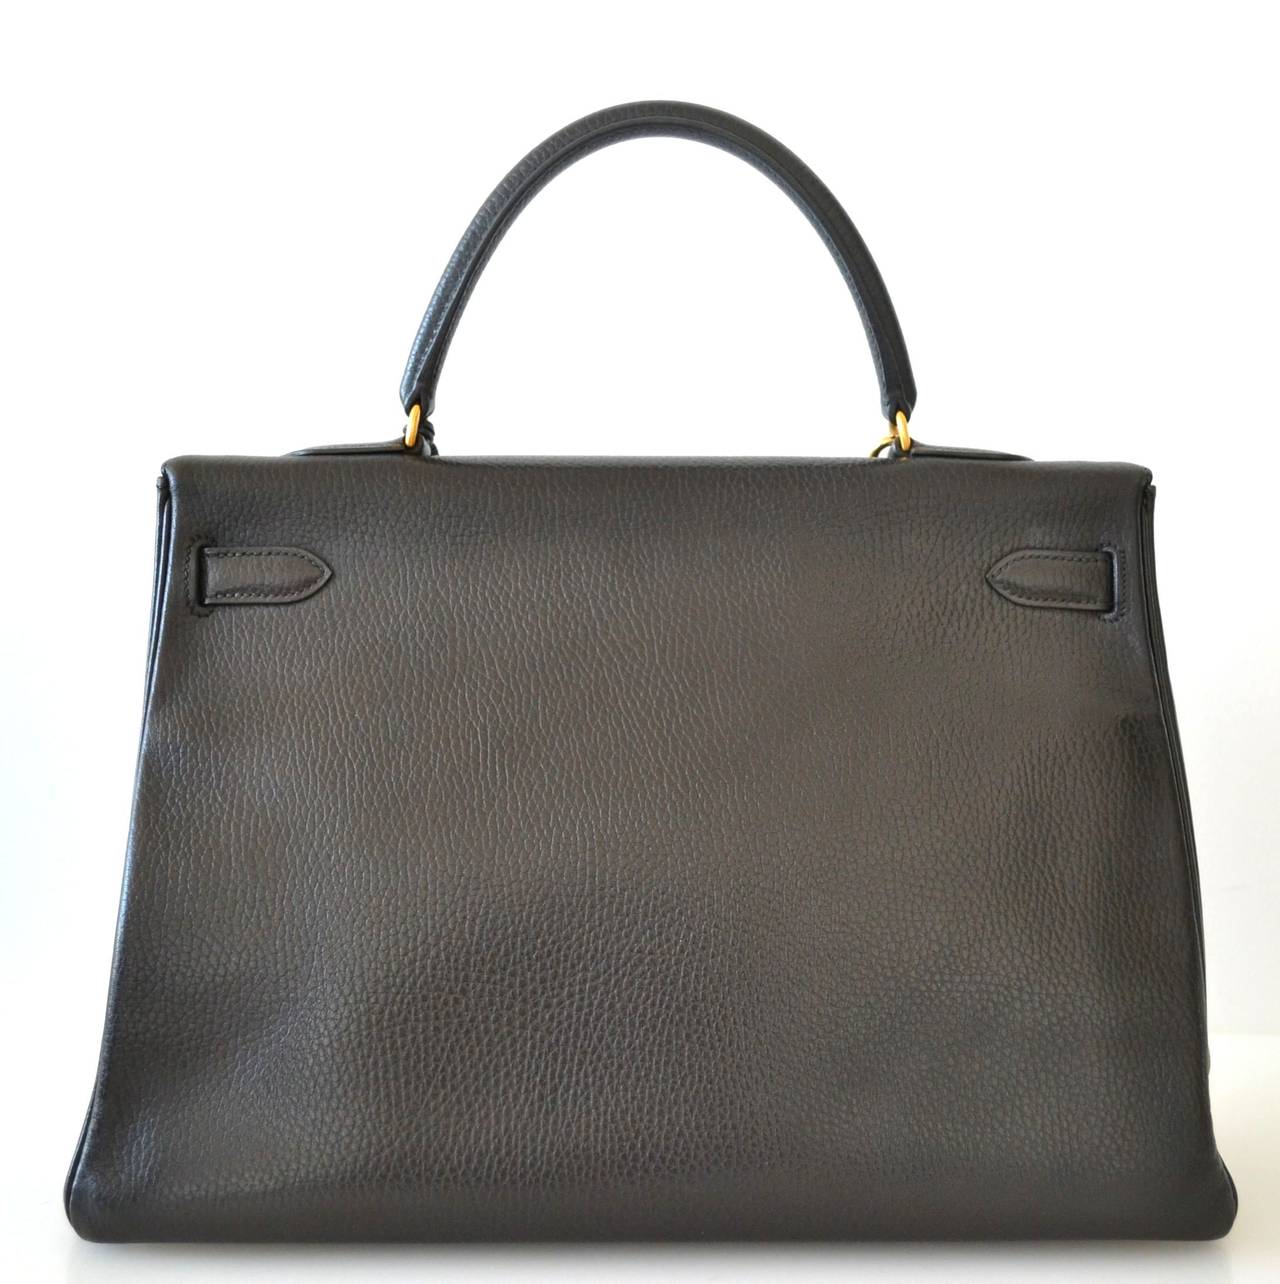 Hermès Kelly 35 Vache Ardennes Black ghdw
 
Ardennes Leather - Official discontinued leather.
Black color
Gold plated hardware
 
Hermes Paris Made In France
Stamp B - 1998
 
Excellent condition 8/10
No holes or major marks
Gentle use
